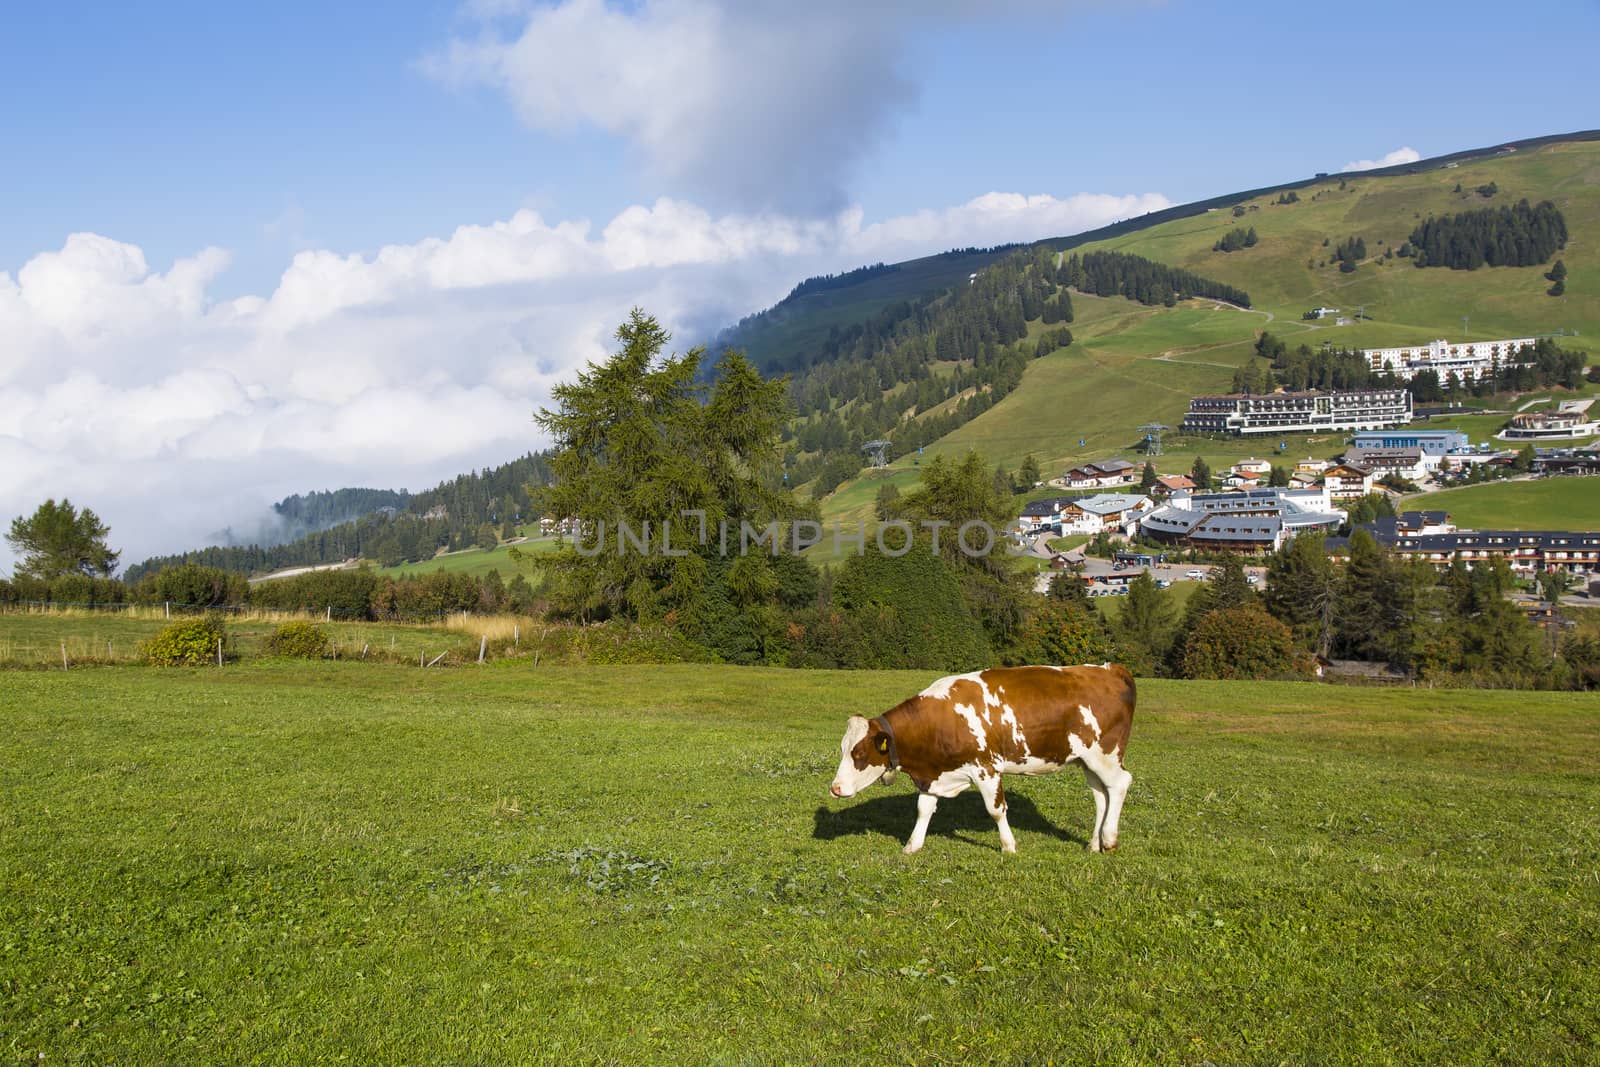 View of the cow grazing in the country of Compatsch in asunny day